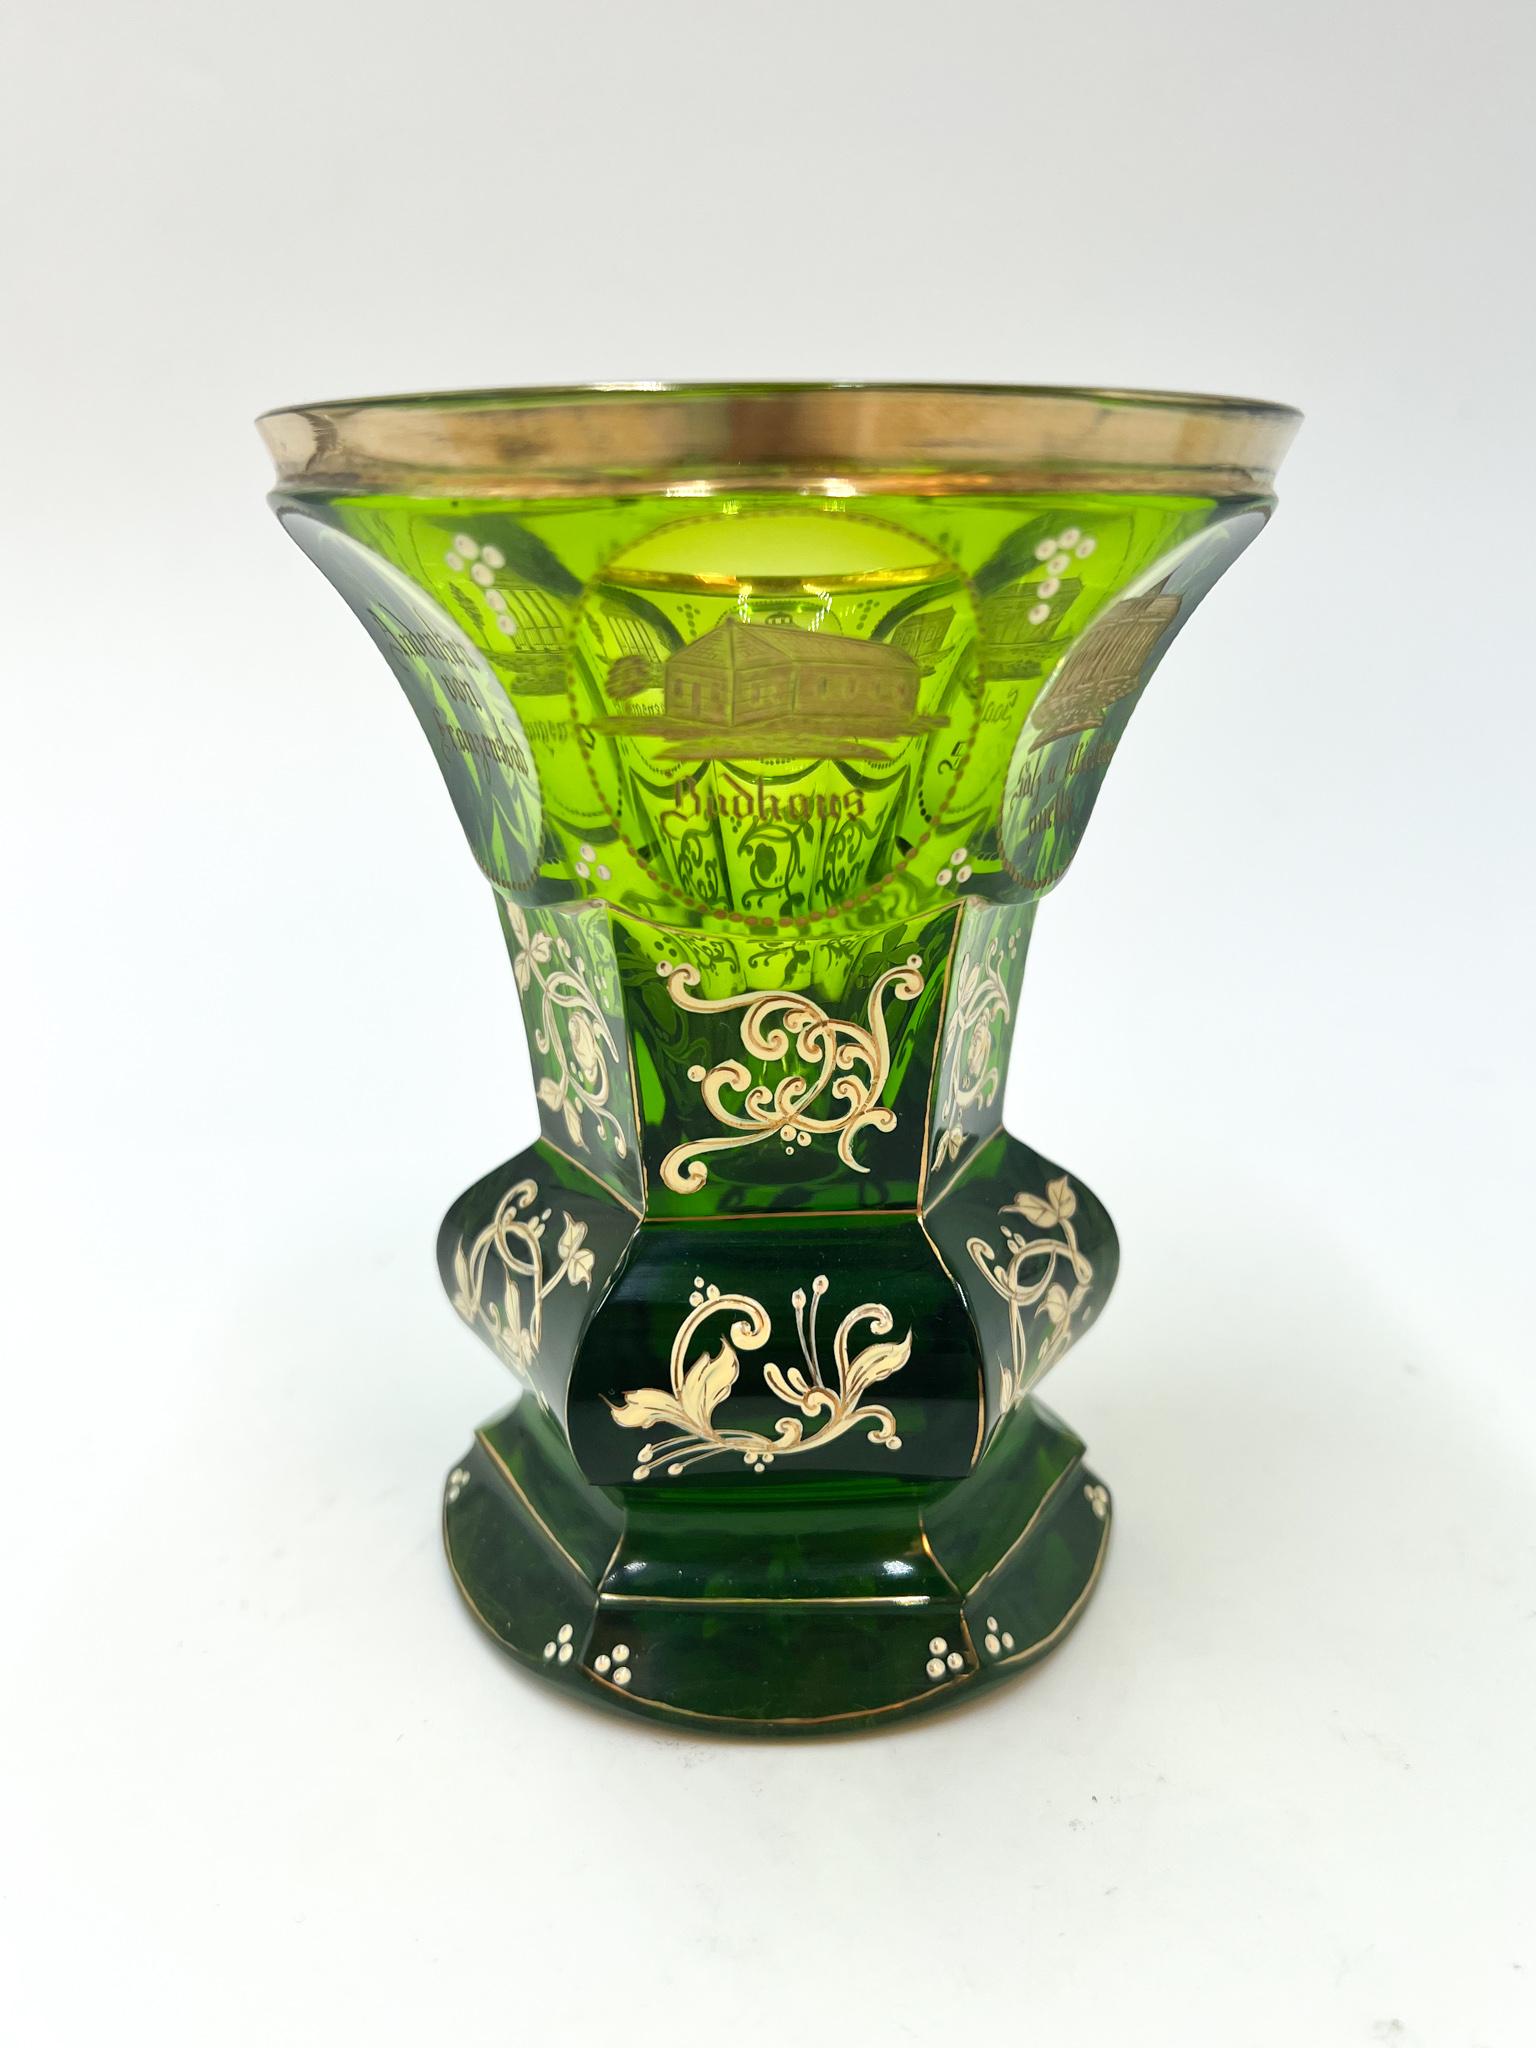 19th Century Green Biedermeier Crystal Glass from the 1800s